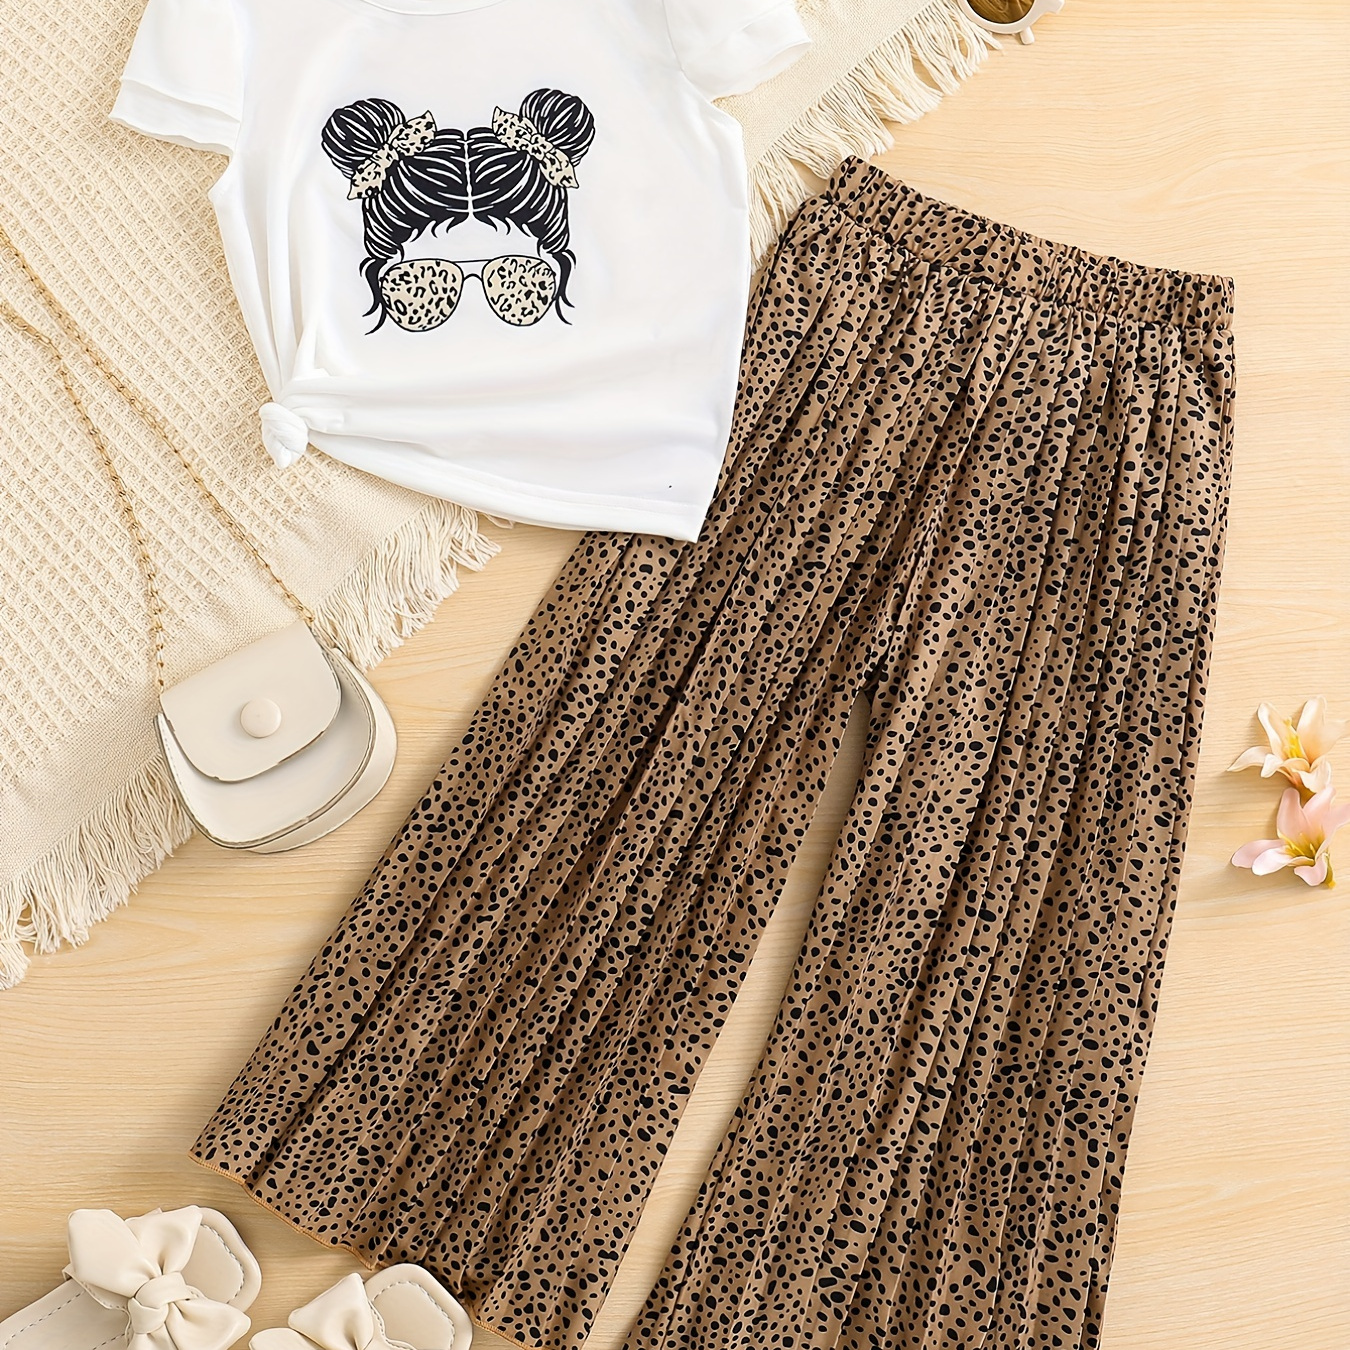 

Girls Two-piece Set Cartoon Portrait Print Short Sleeve T-shirt & Pleated Polka Dot Pants Chic Casual Kids Clothes For Summer